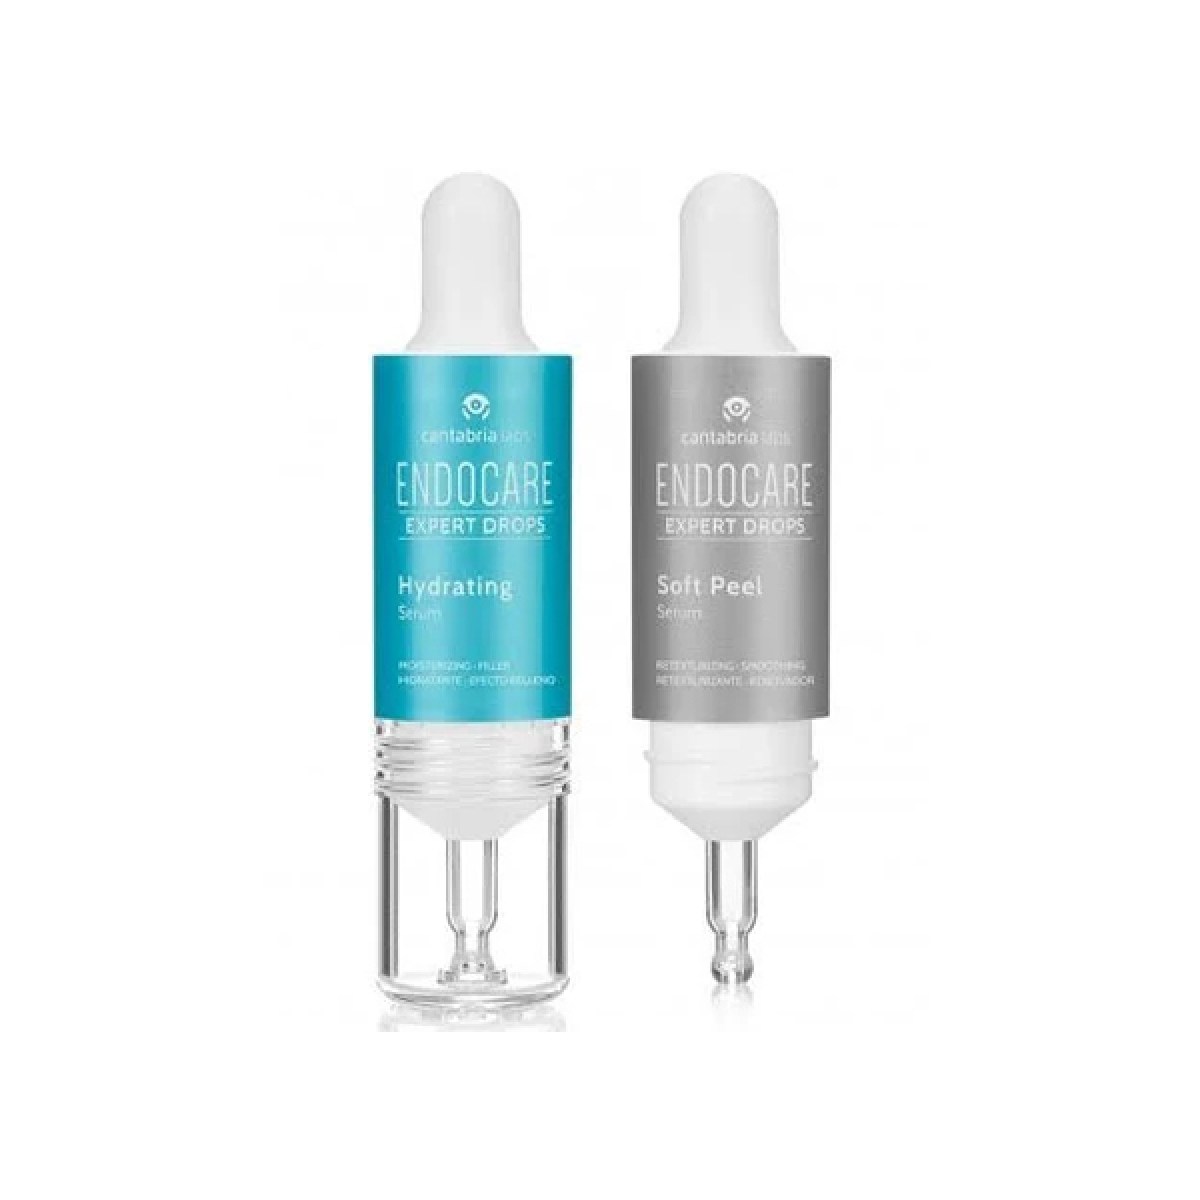 endocare_expert_drops_hydrating_protocol